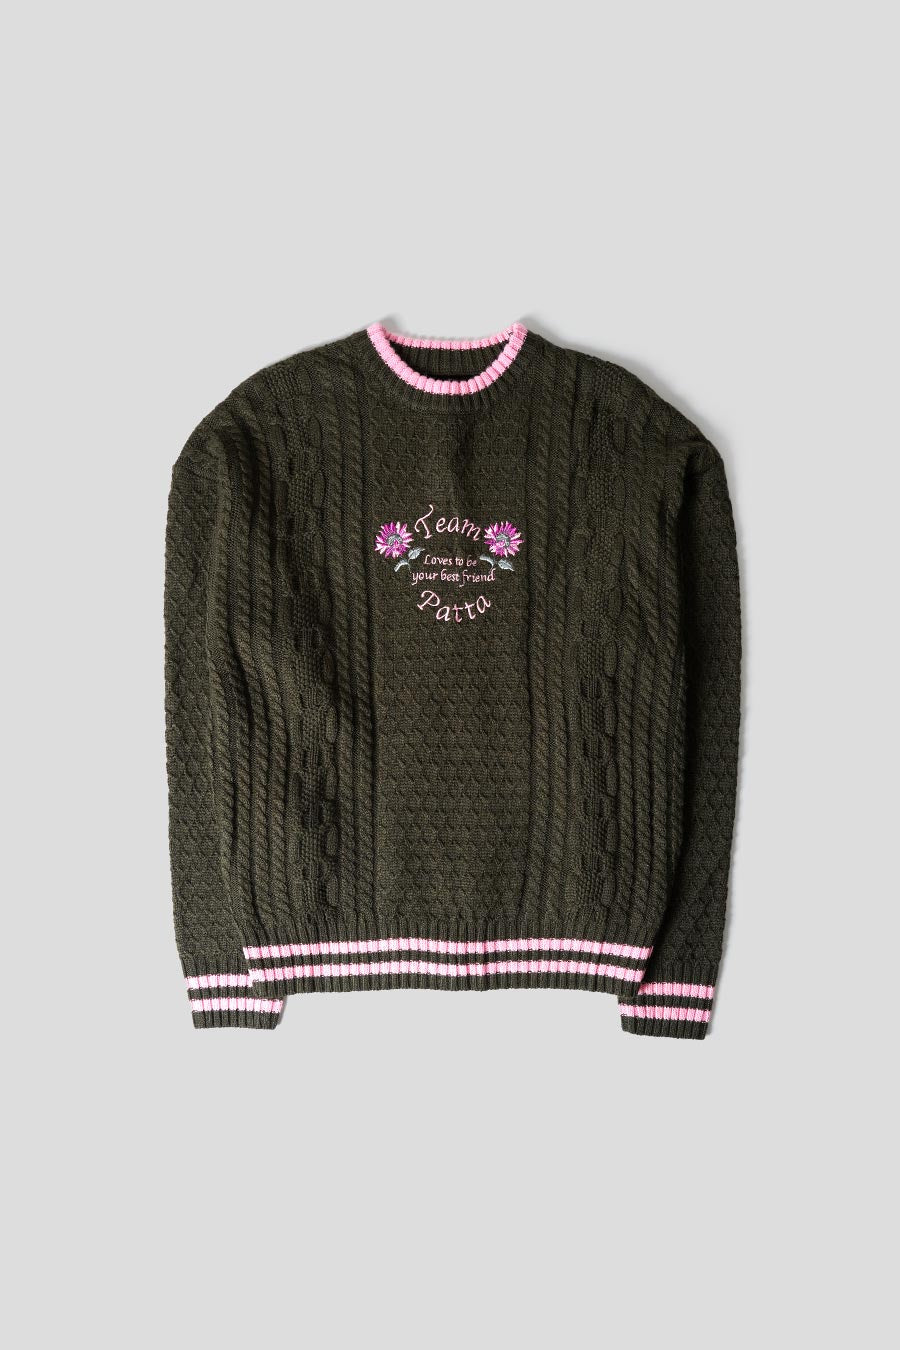 Patta - LOVES YOU CABLE KHAKI AND PINK JUMPER - LE LABO STORE